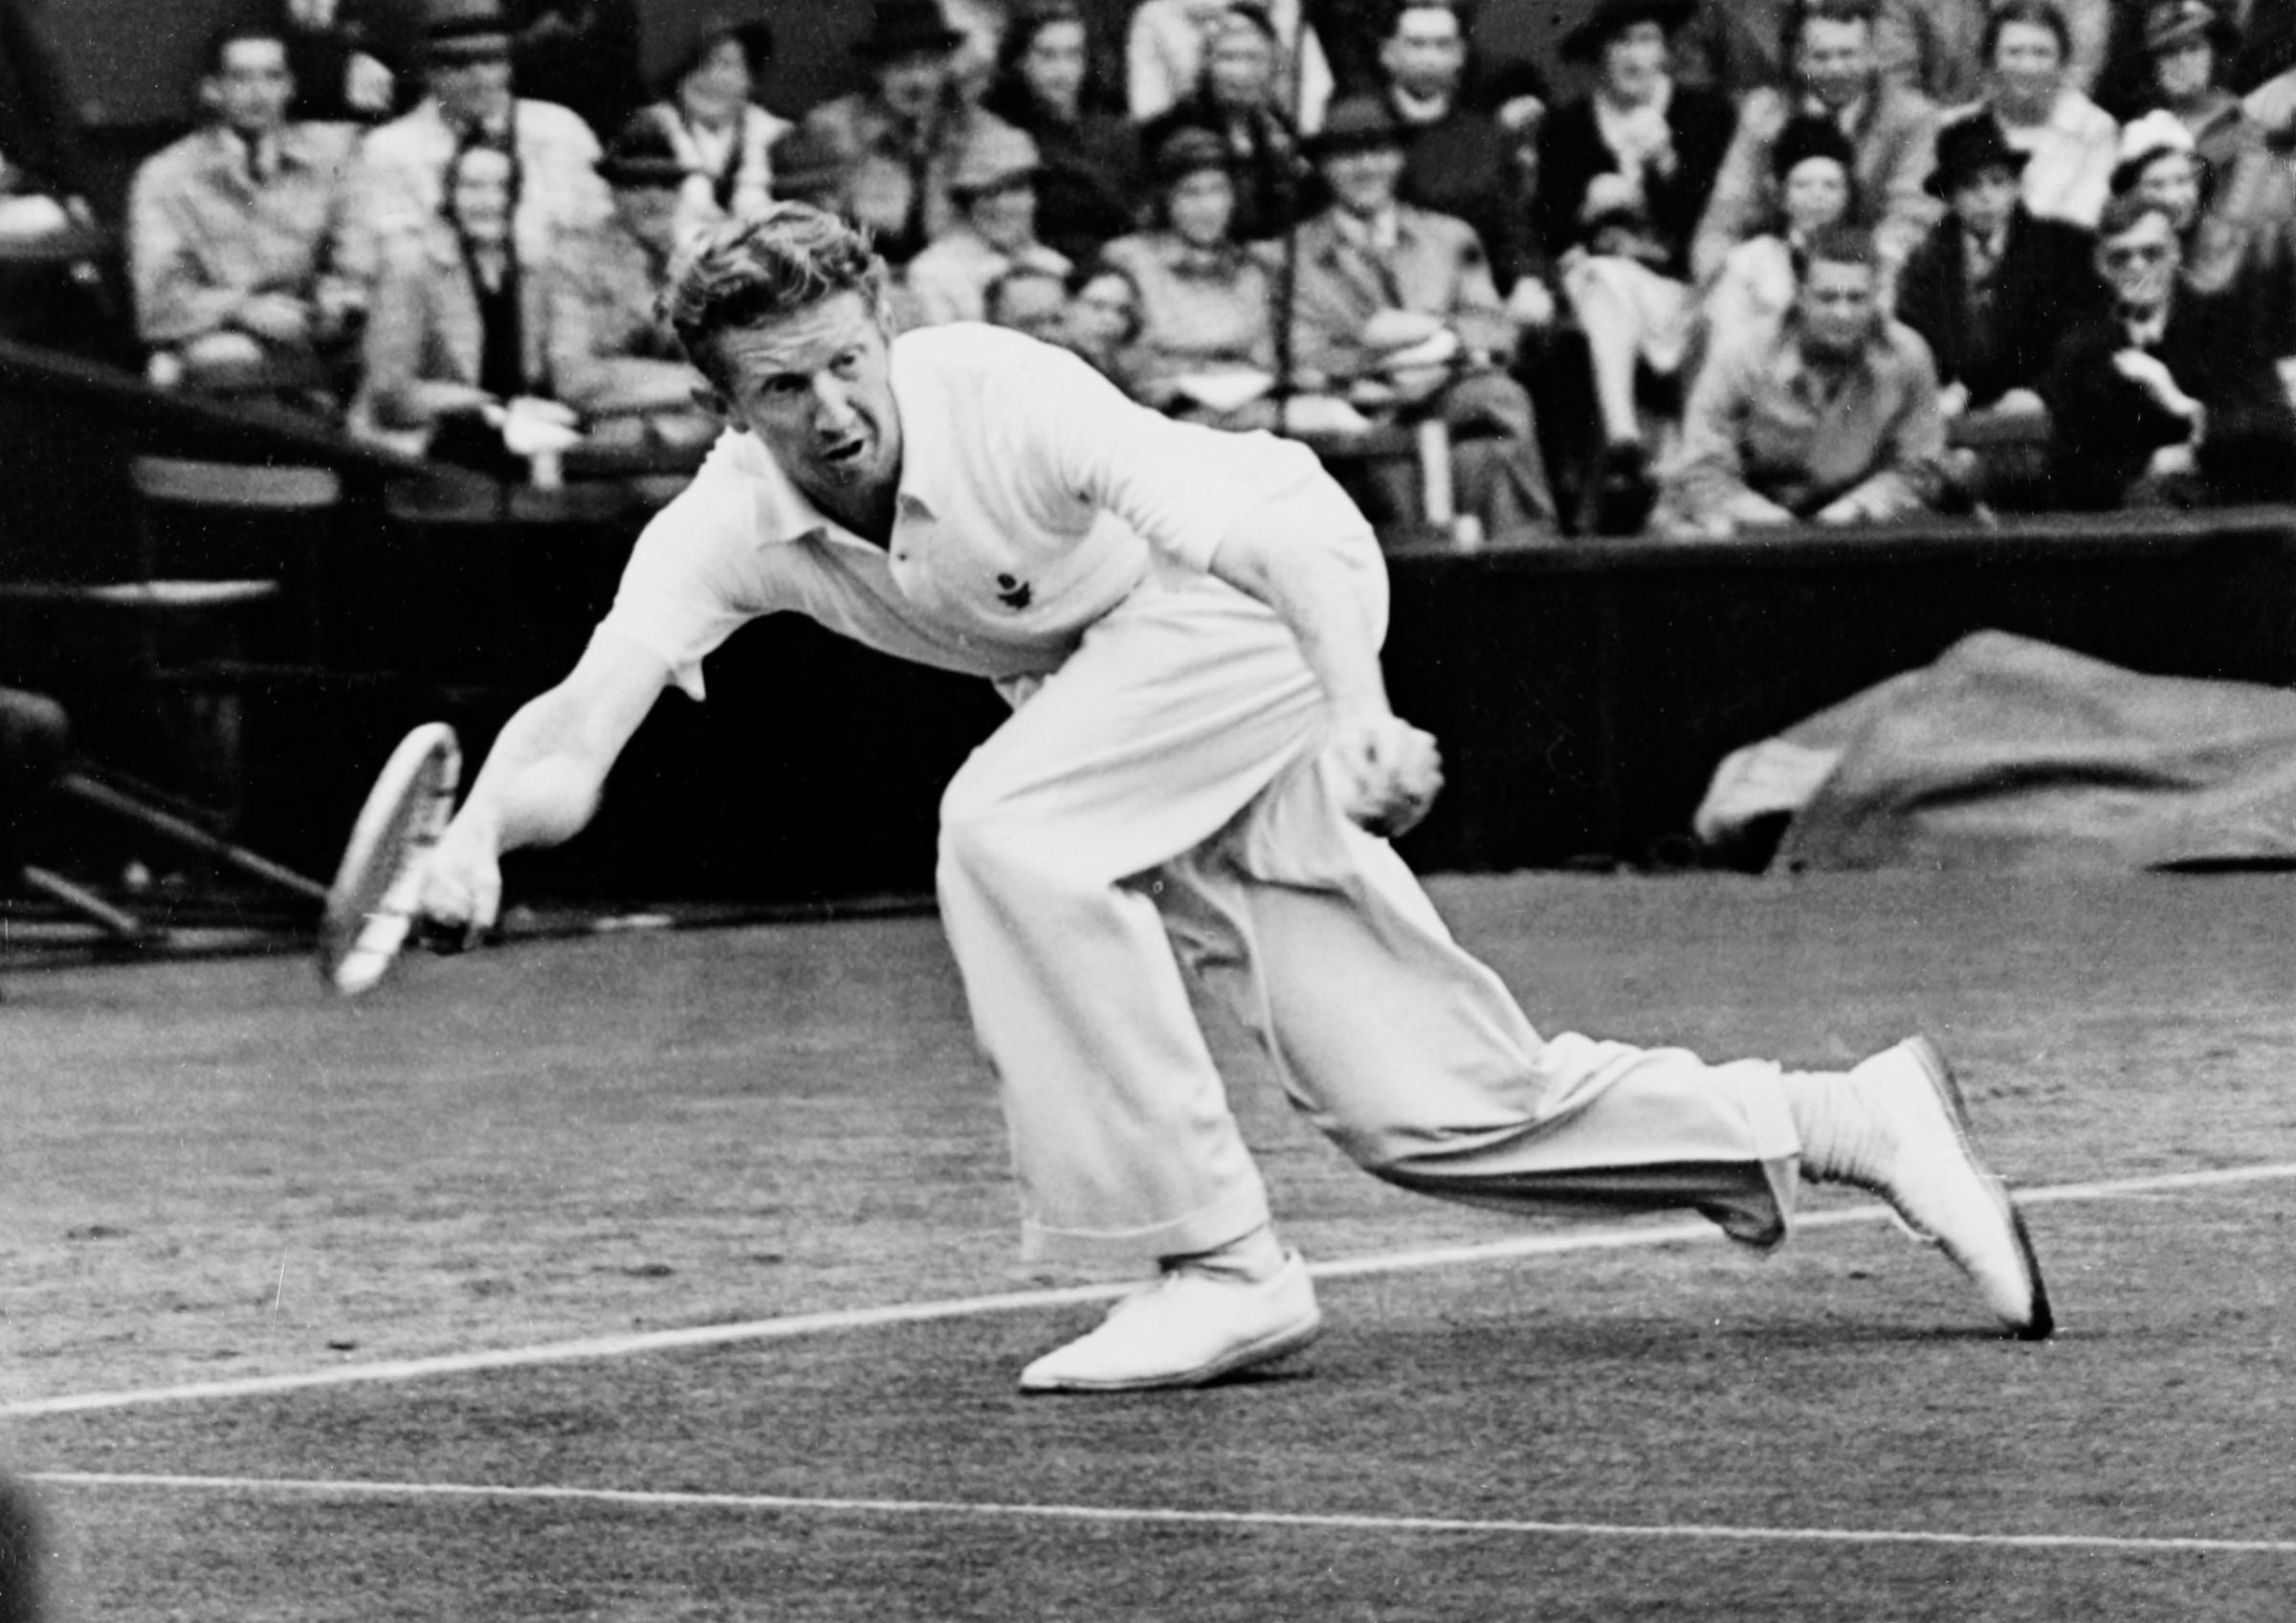 Don Budge in the first round at Wimbledon. June 28th 1938.